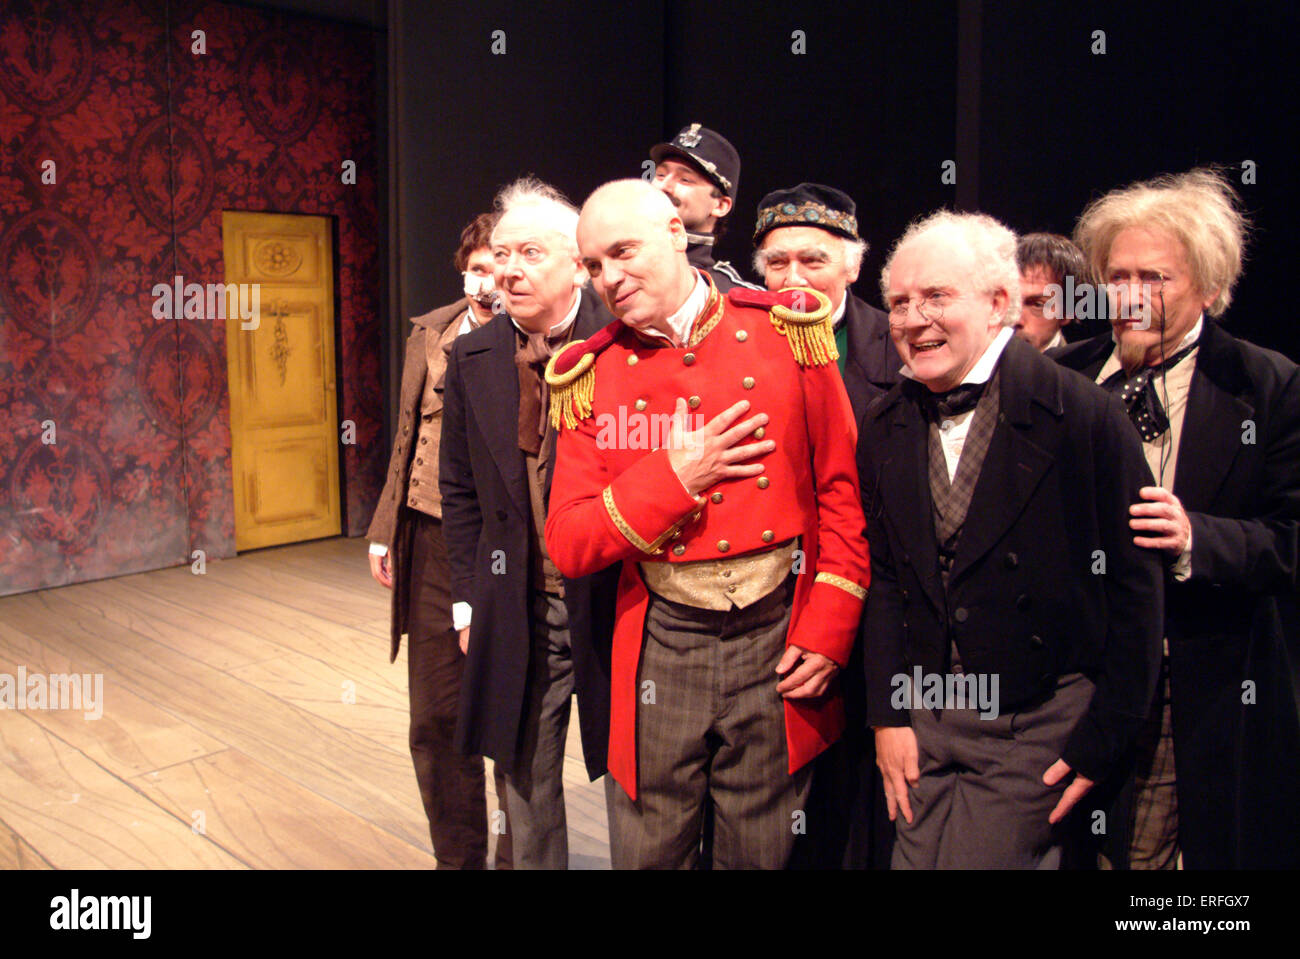 The Government Inspector - scene from the play by Nikolai Gogol with the cast of corrupt officials seen fawning to the Stock Photo